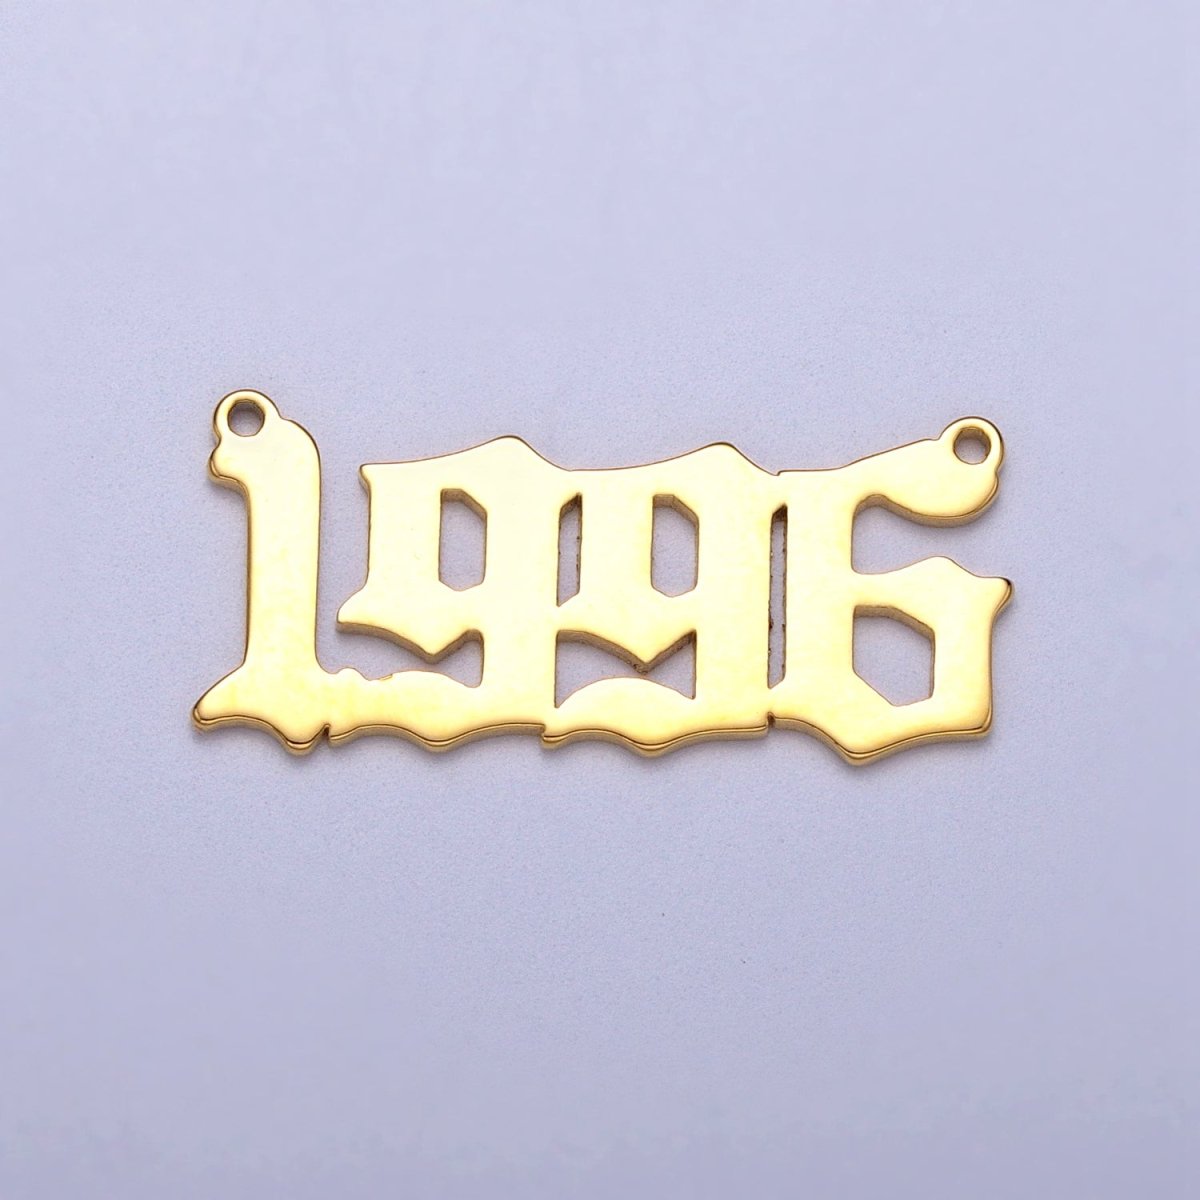 Gold Filled Birth Year Charm Connector Birthday Number Anniversary Old English Number Link Connector for Necklace Bracelet Component Y-690 ~ Y-700 - DLUXCA